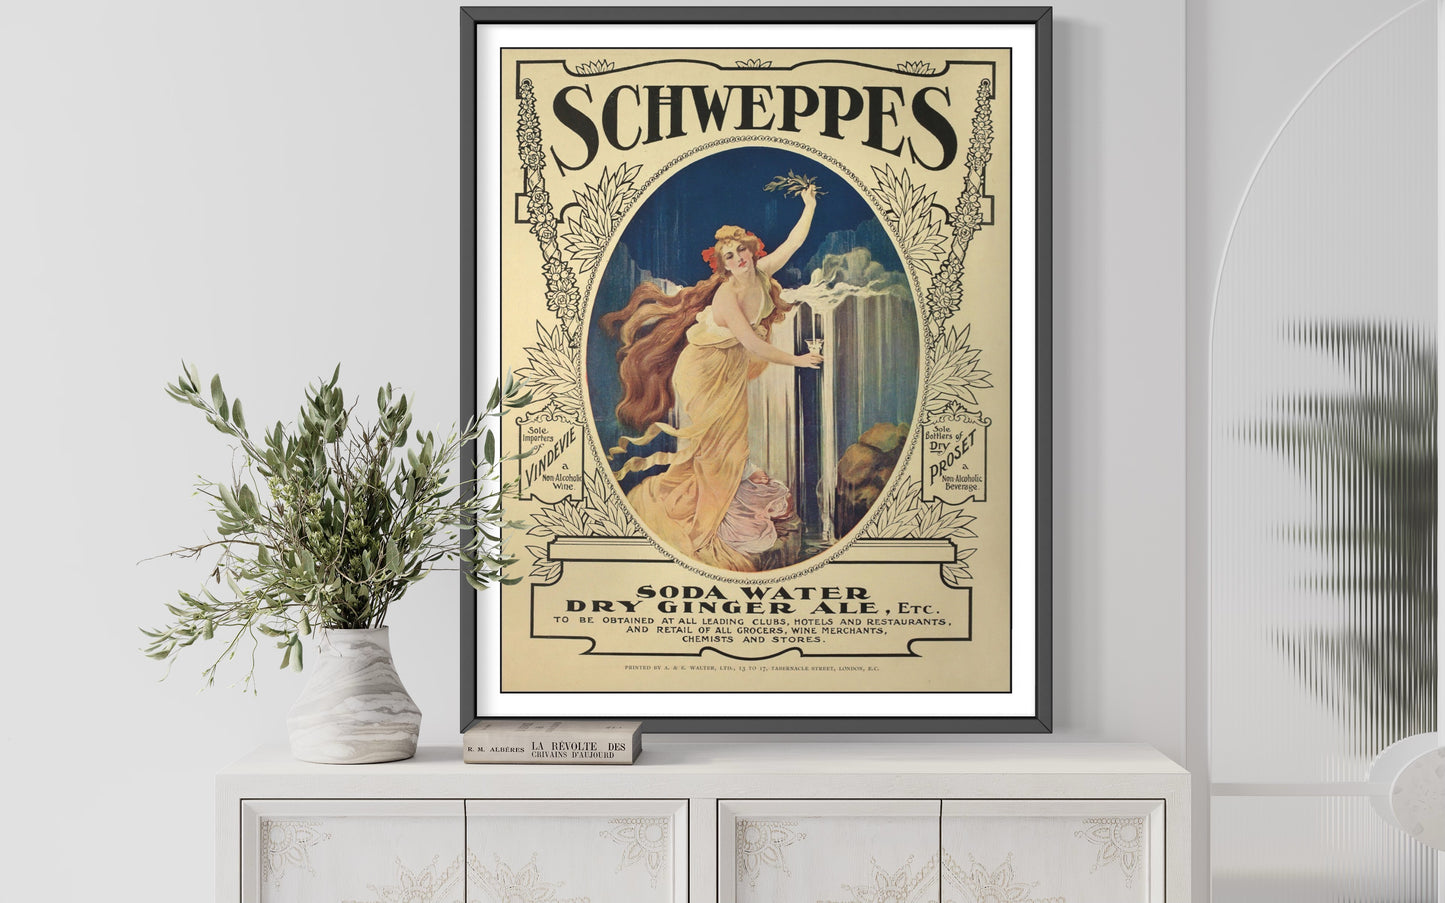 Art nouveau poster for Schweppes in 1908